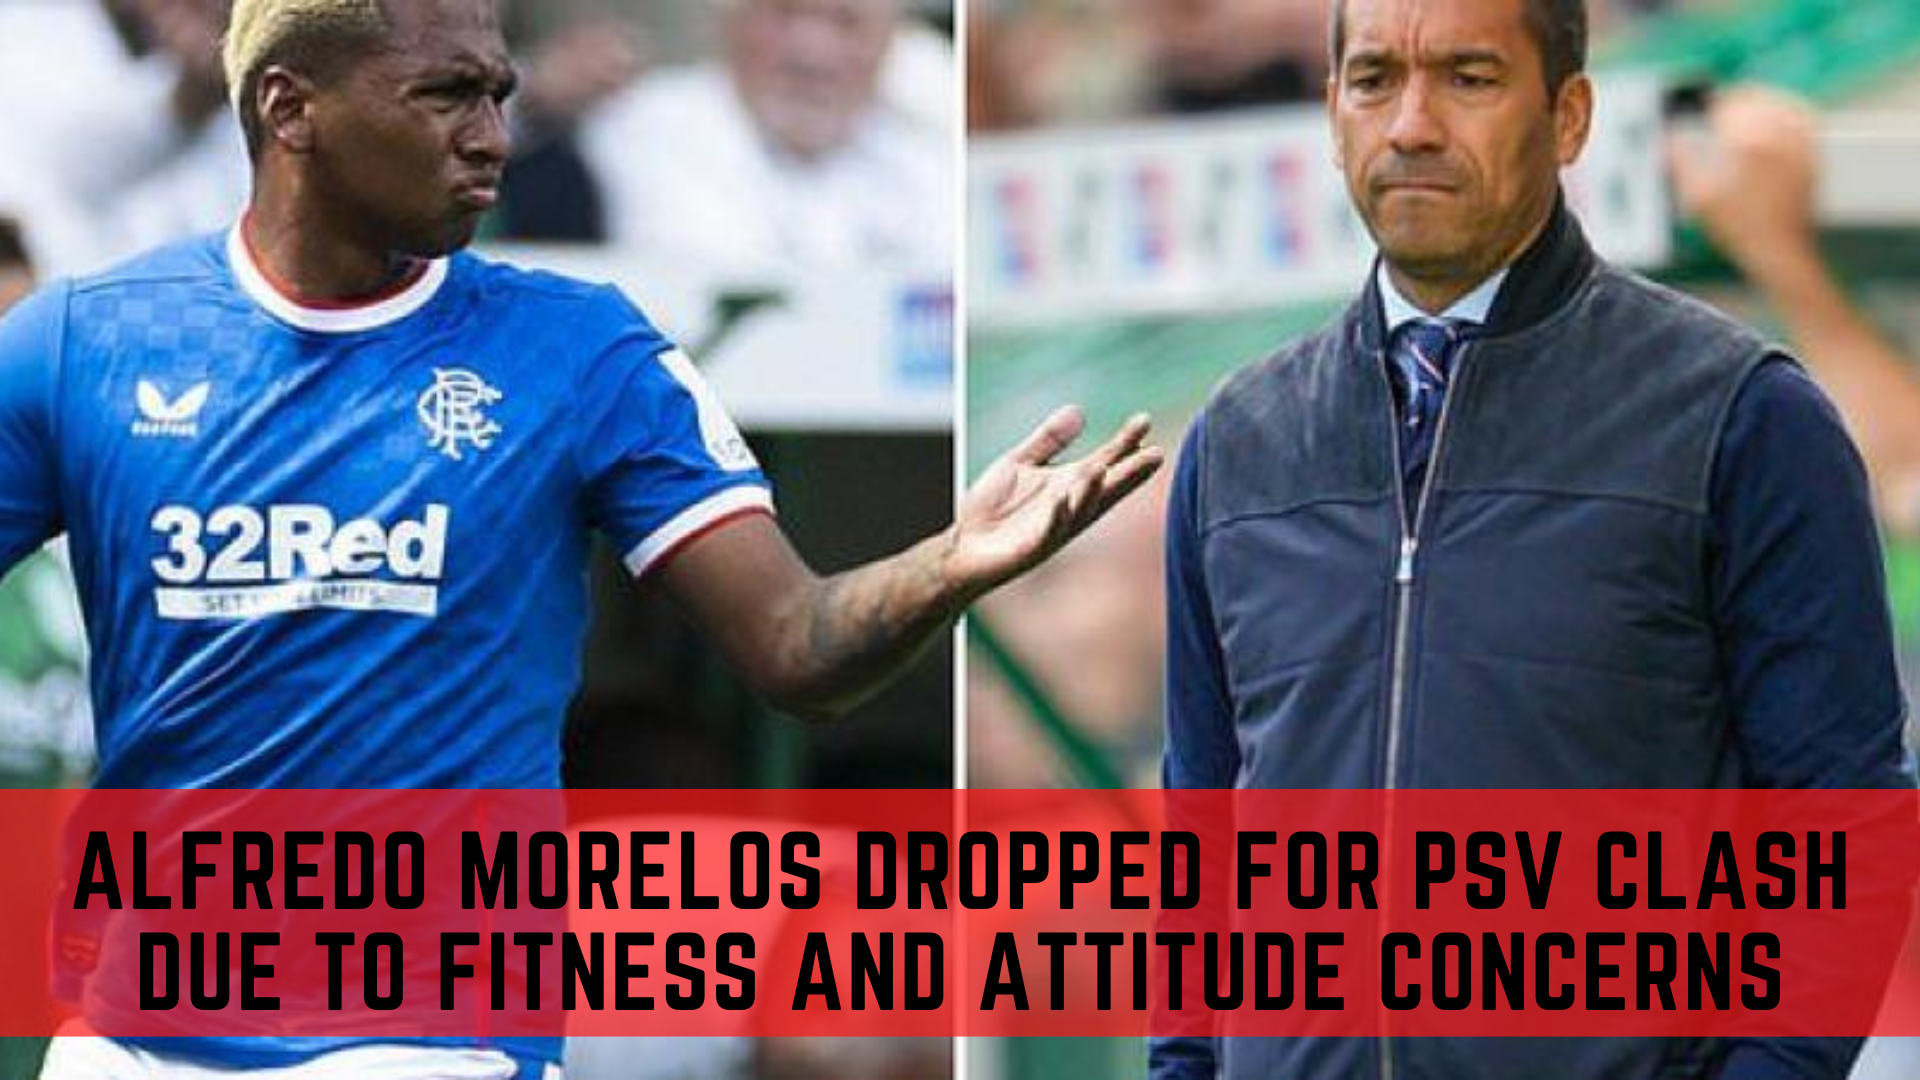 Alfredo Morelos Dropped For PSV Clash Due To Fitness And Attitude Concerns